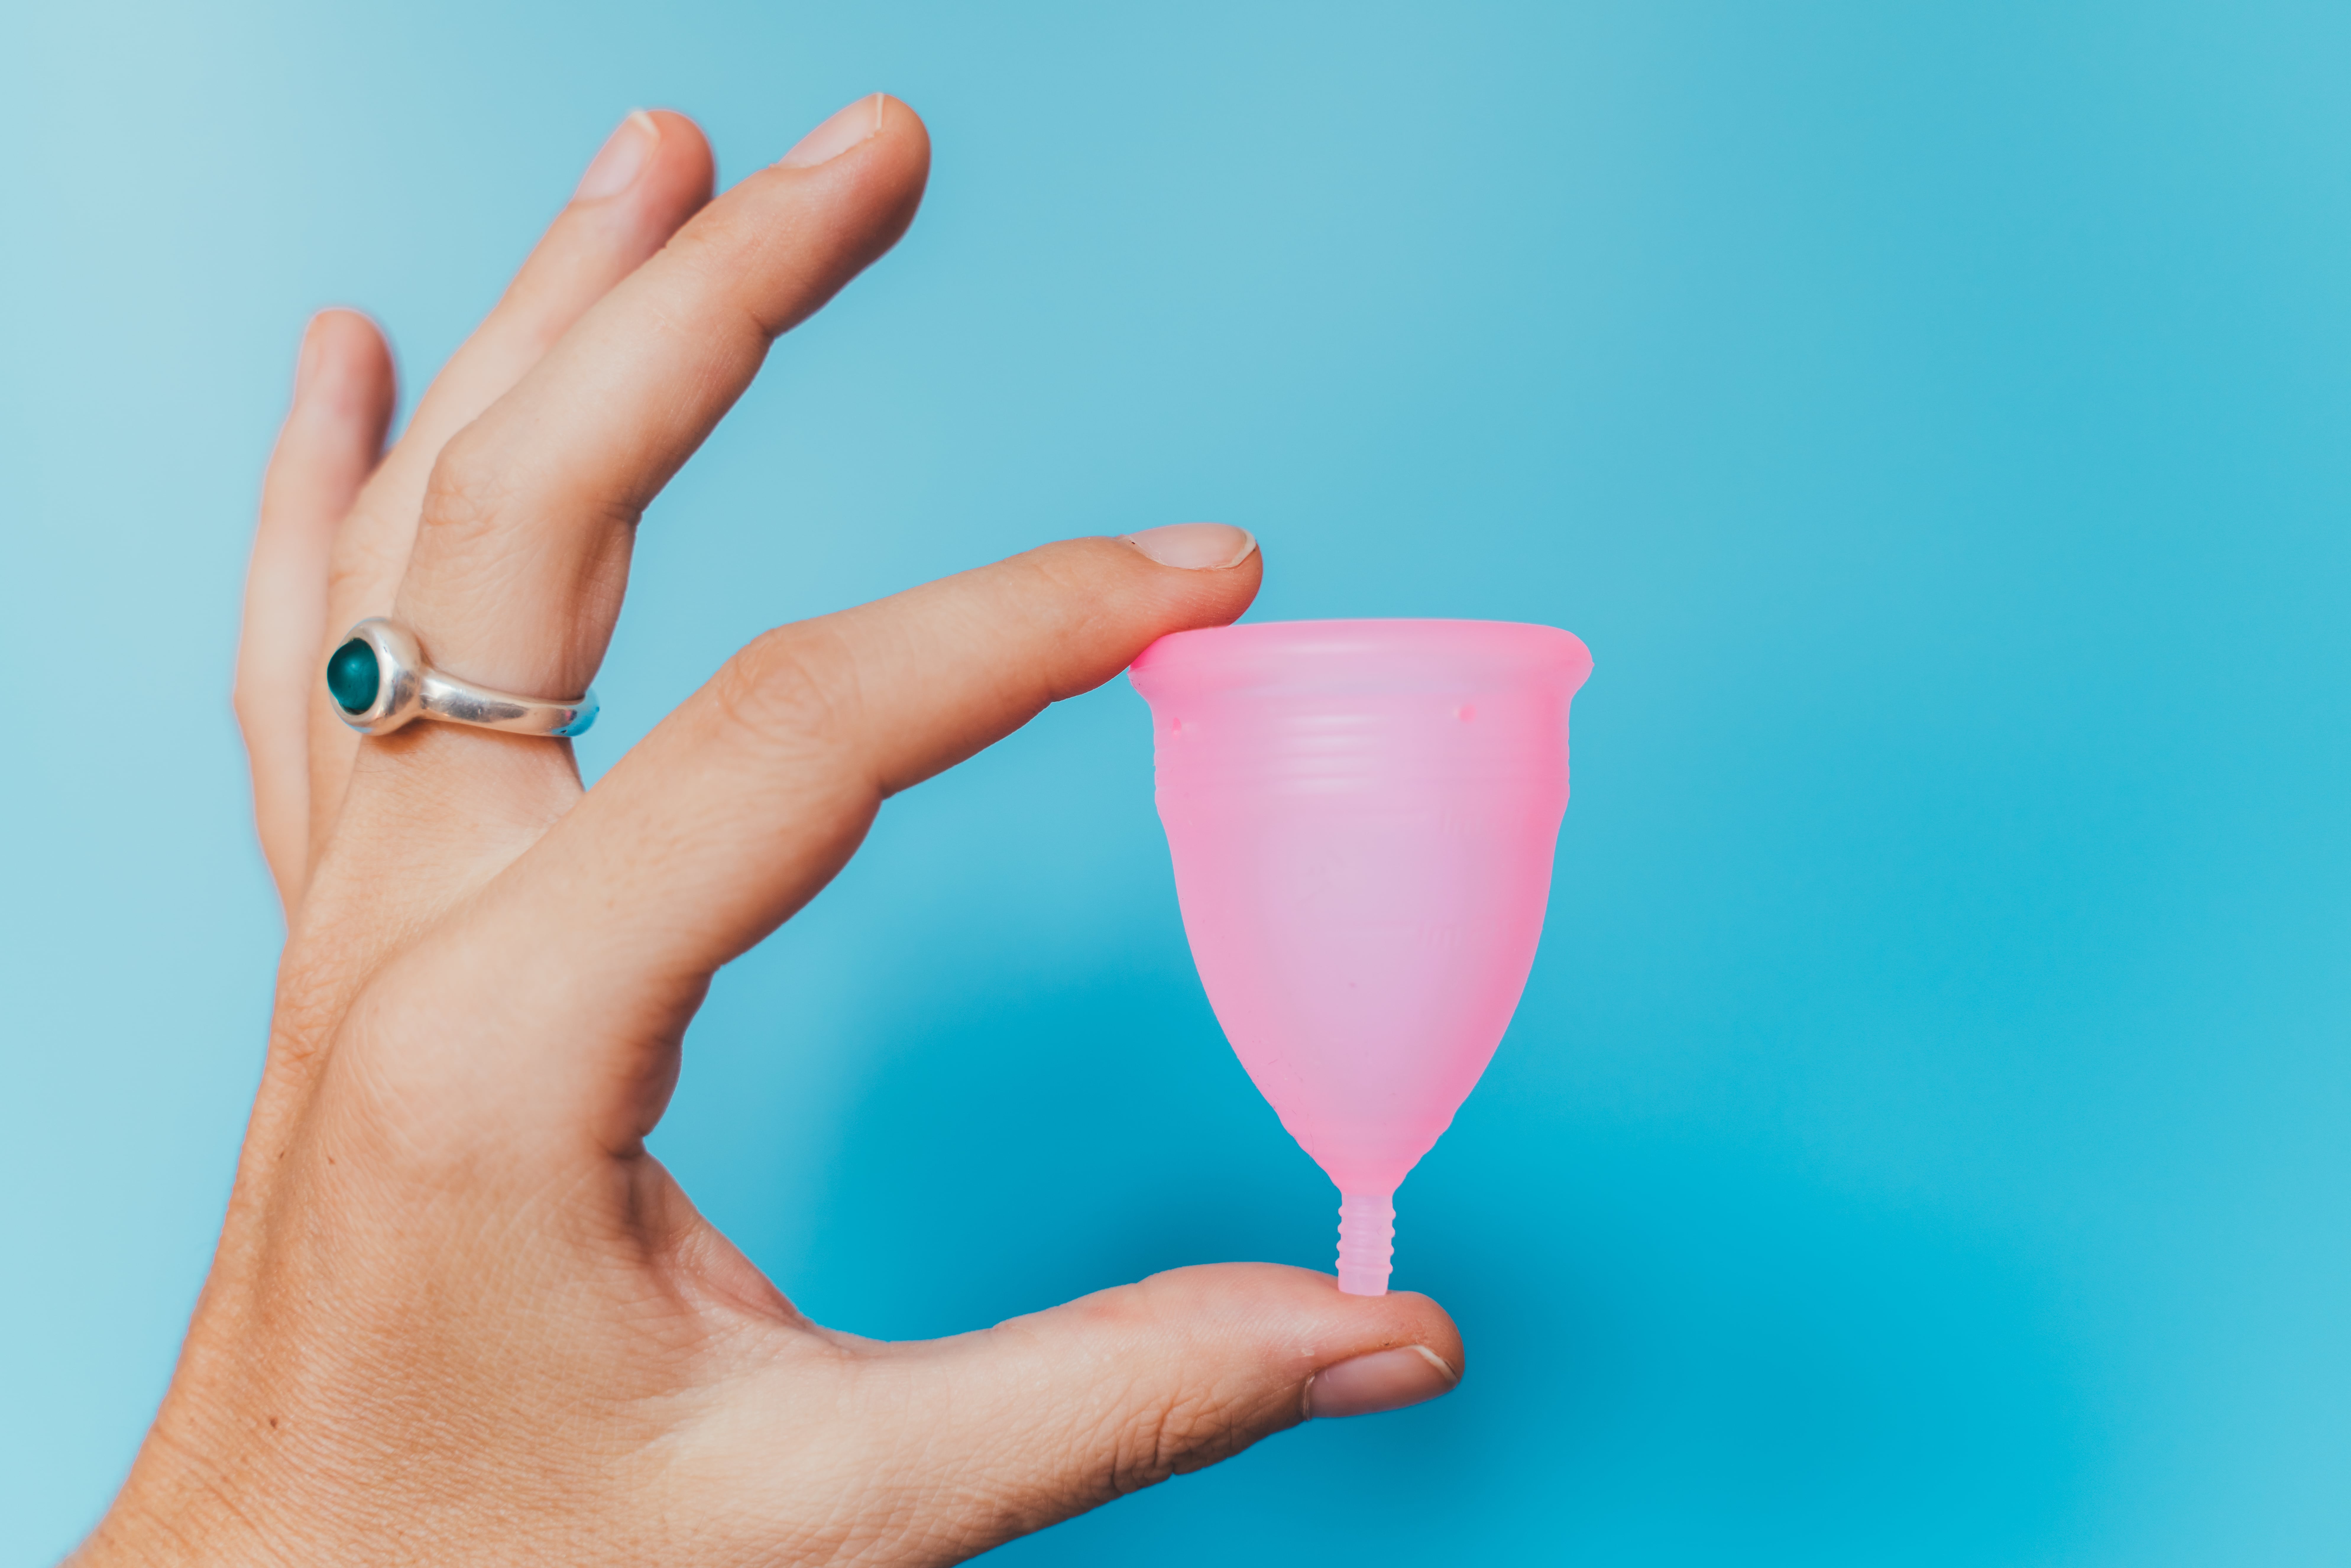 Why are menstrual cups becoming more popular?